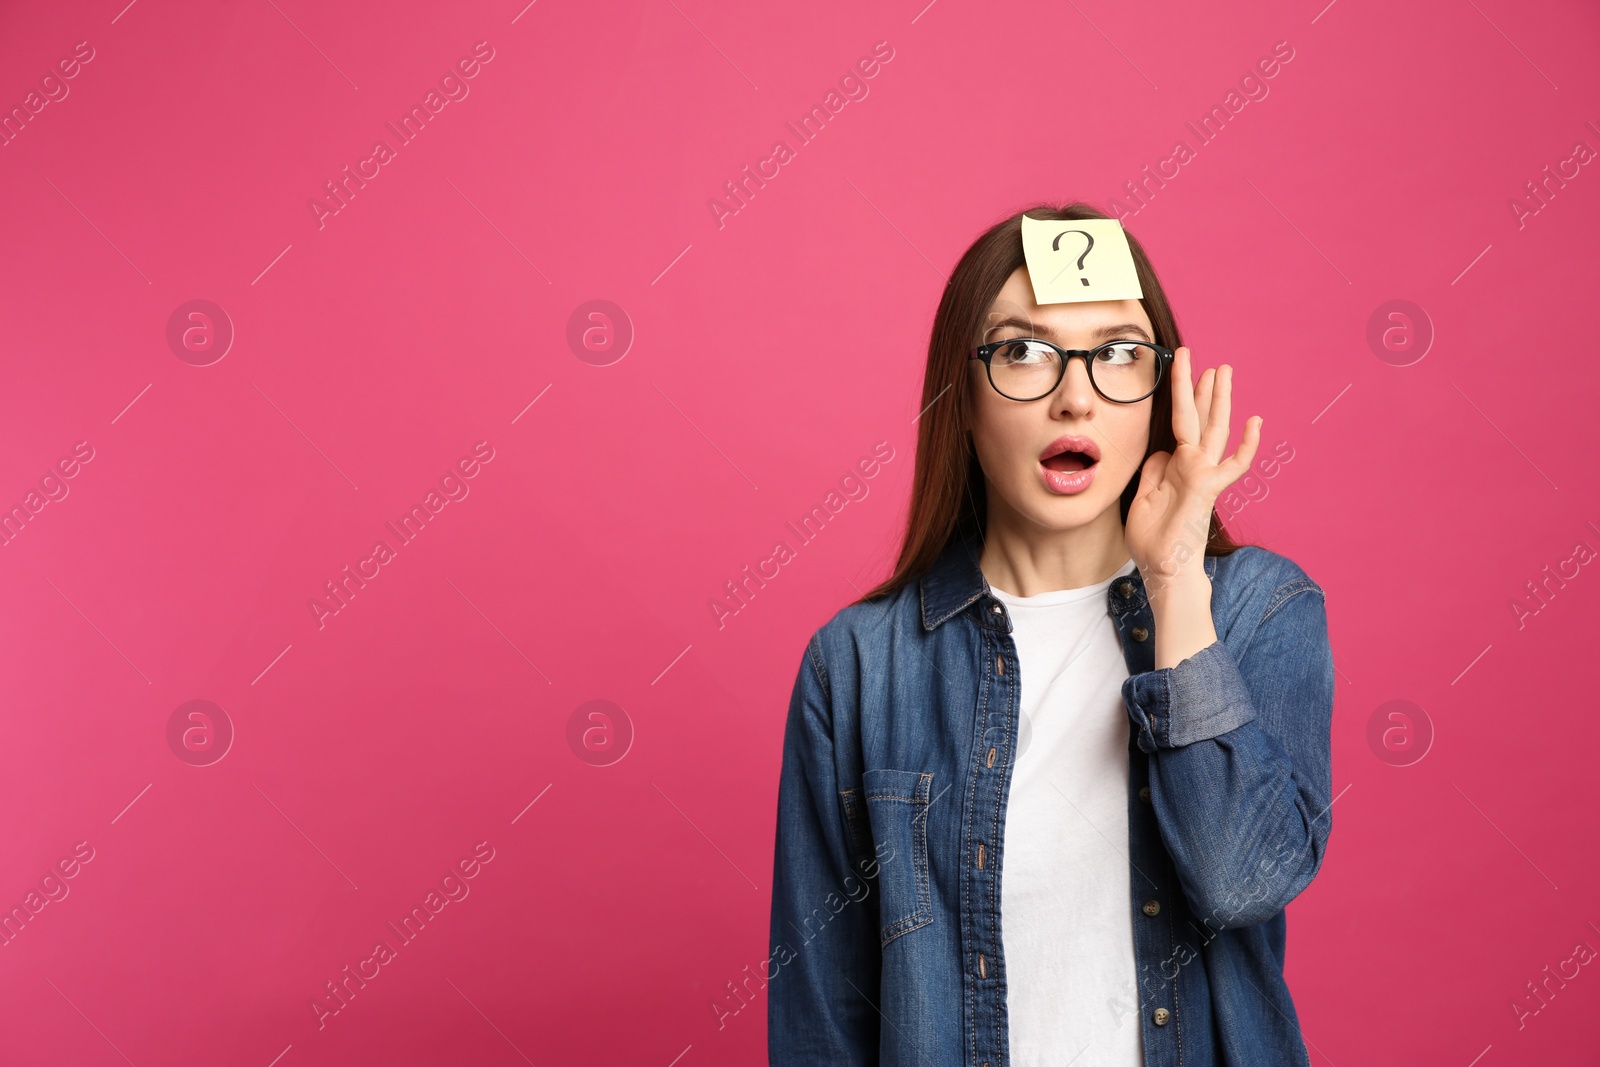 Photo of Emotional woman with question mark sticker on forehead against pink background. Space for text